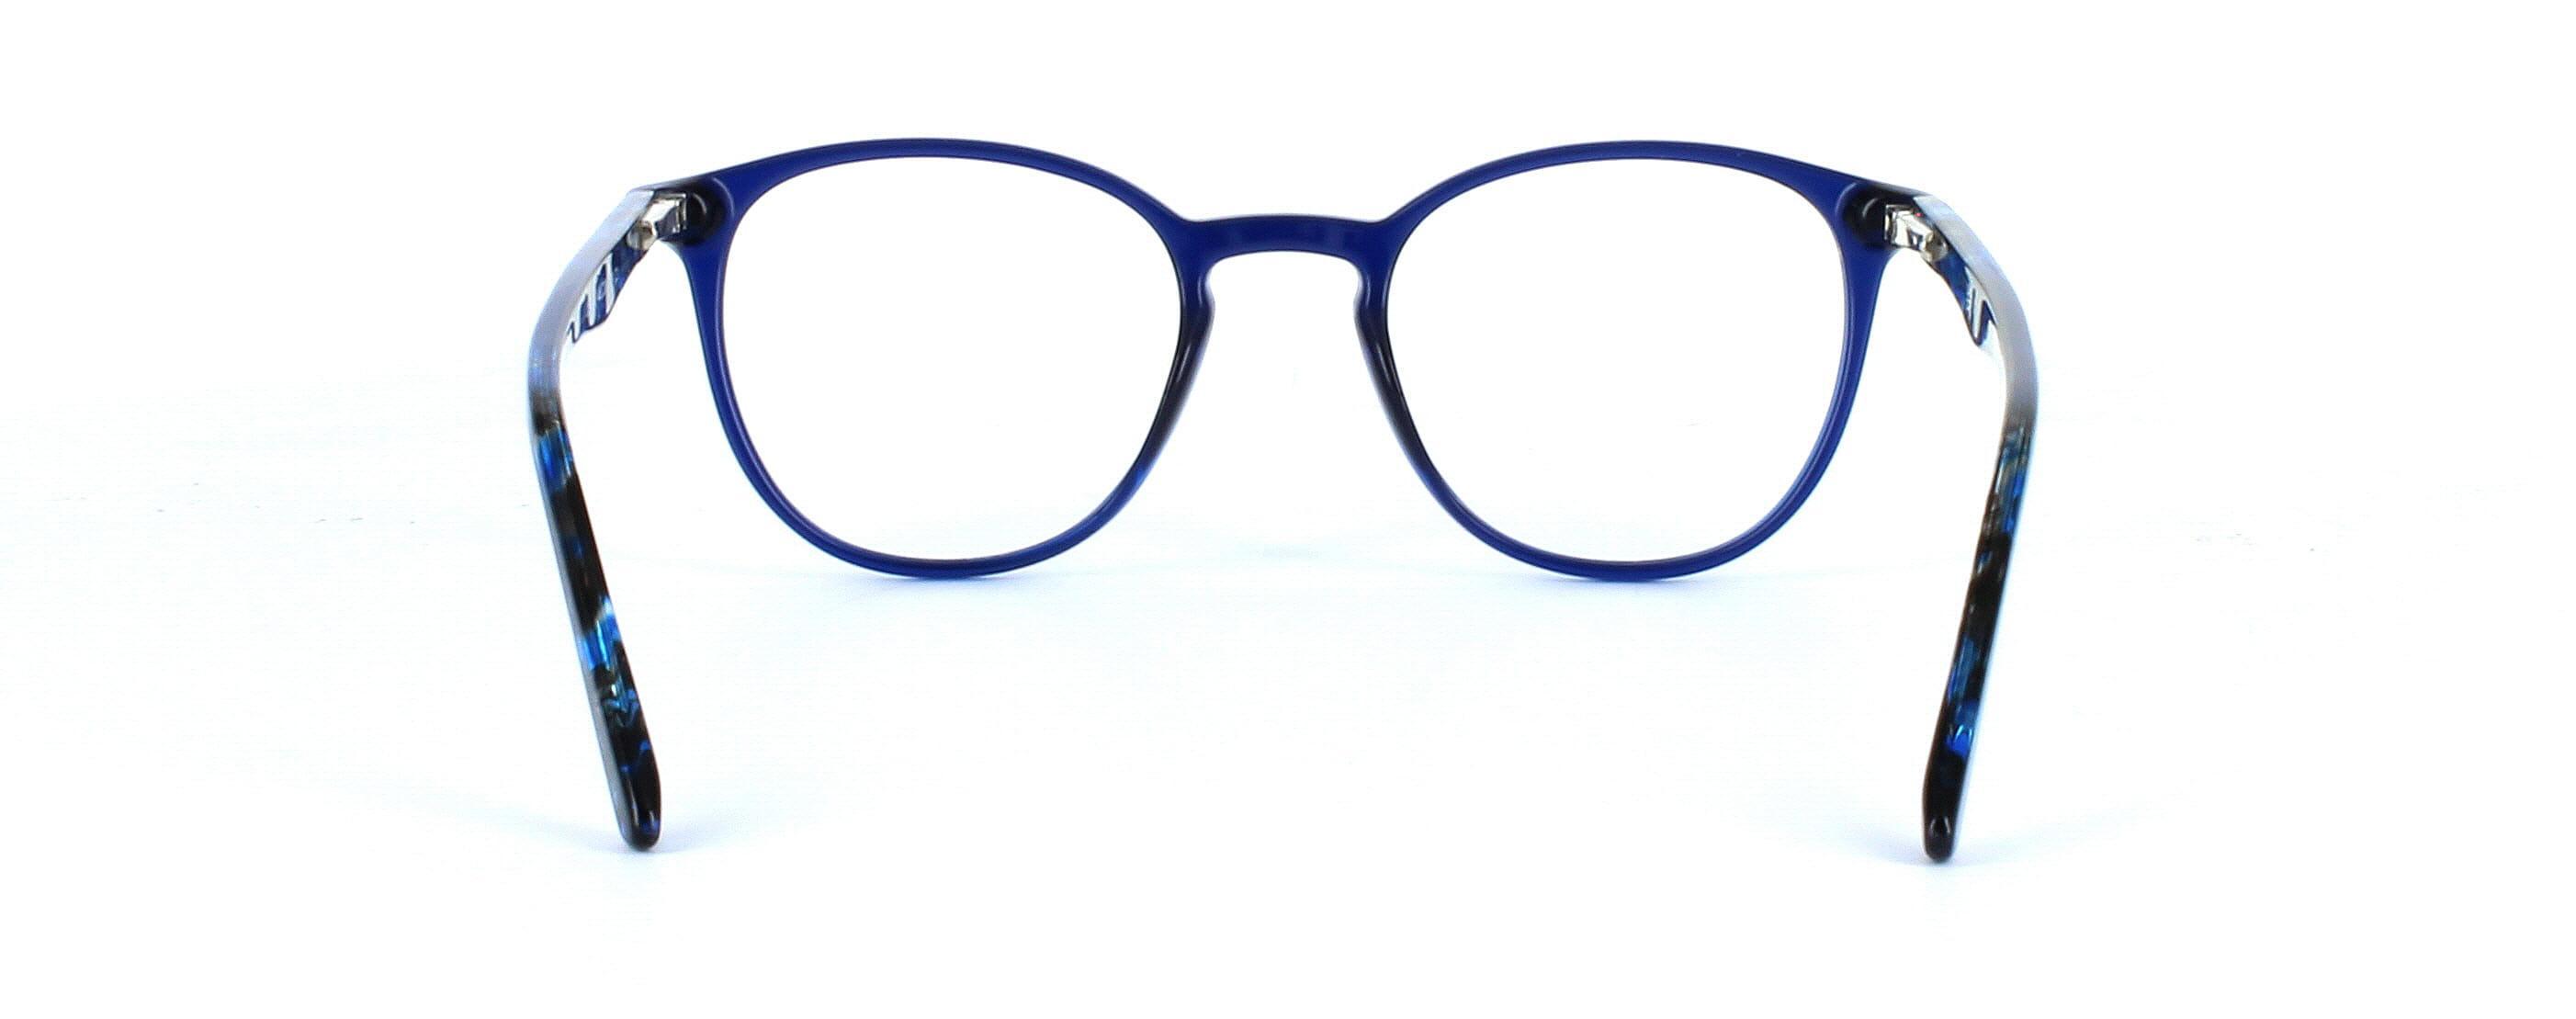 Canis - ladies plastic round shaped glasses frame in blue - image 3